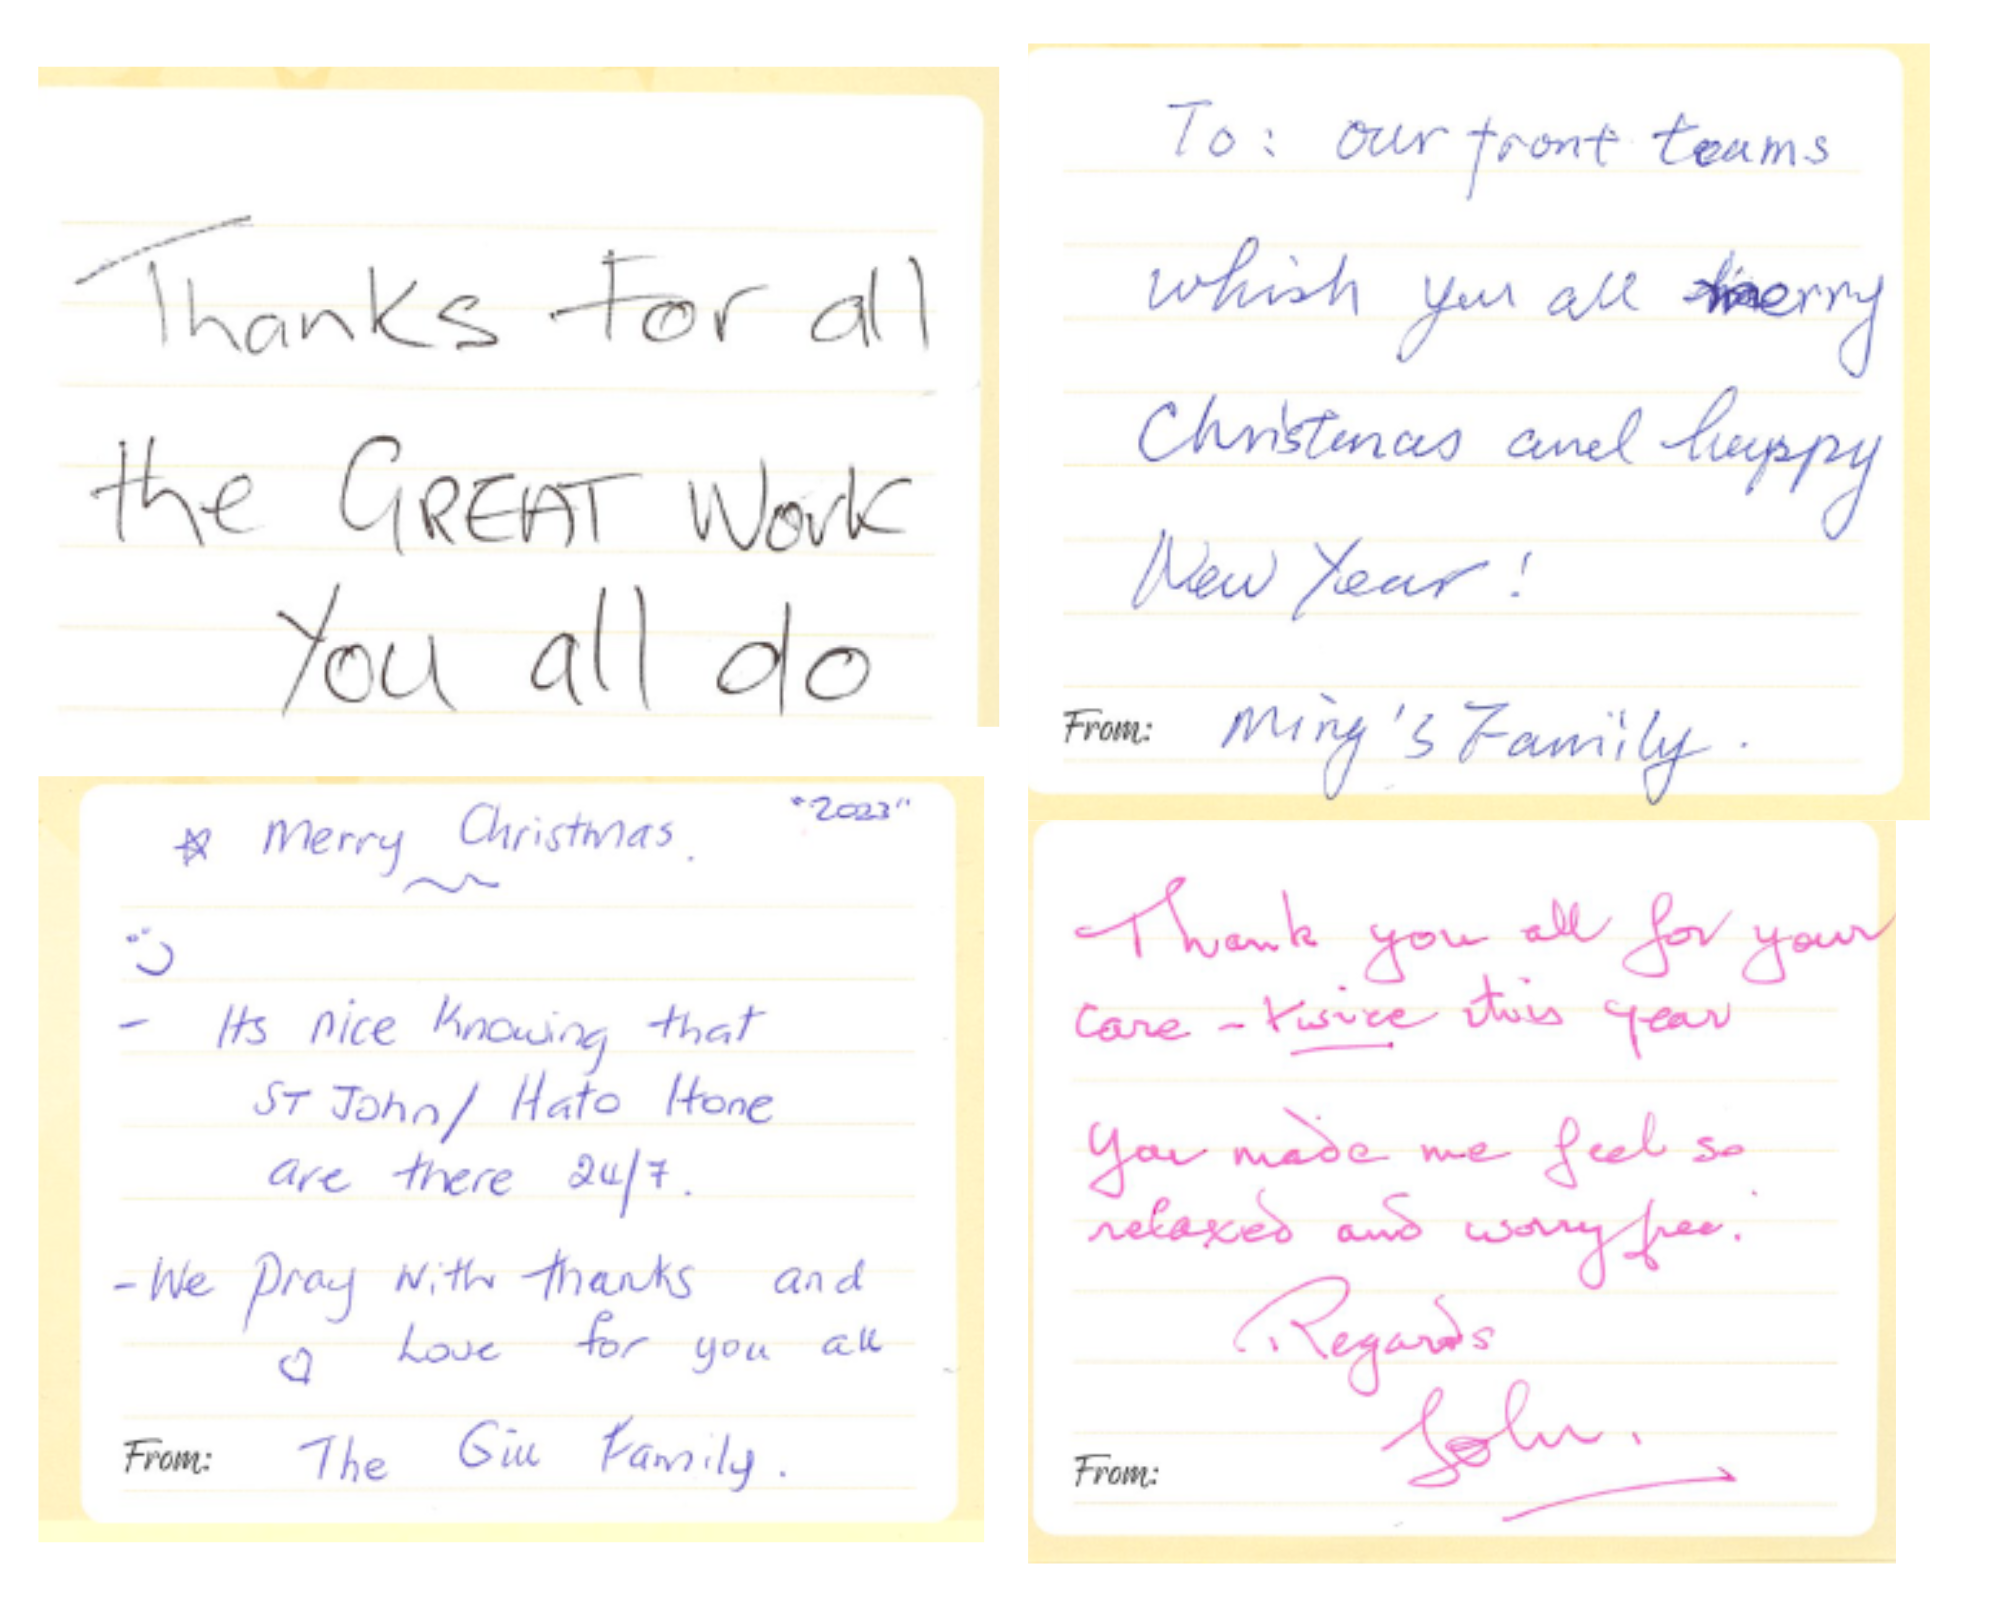 Christmas messages of support for frontline crews